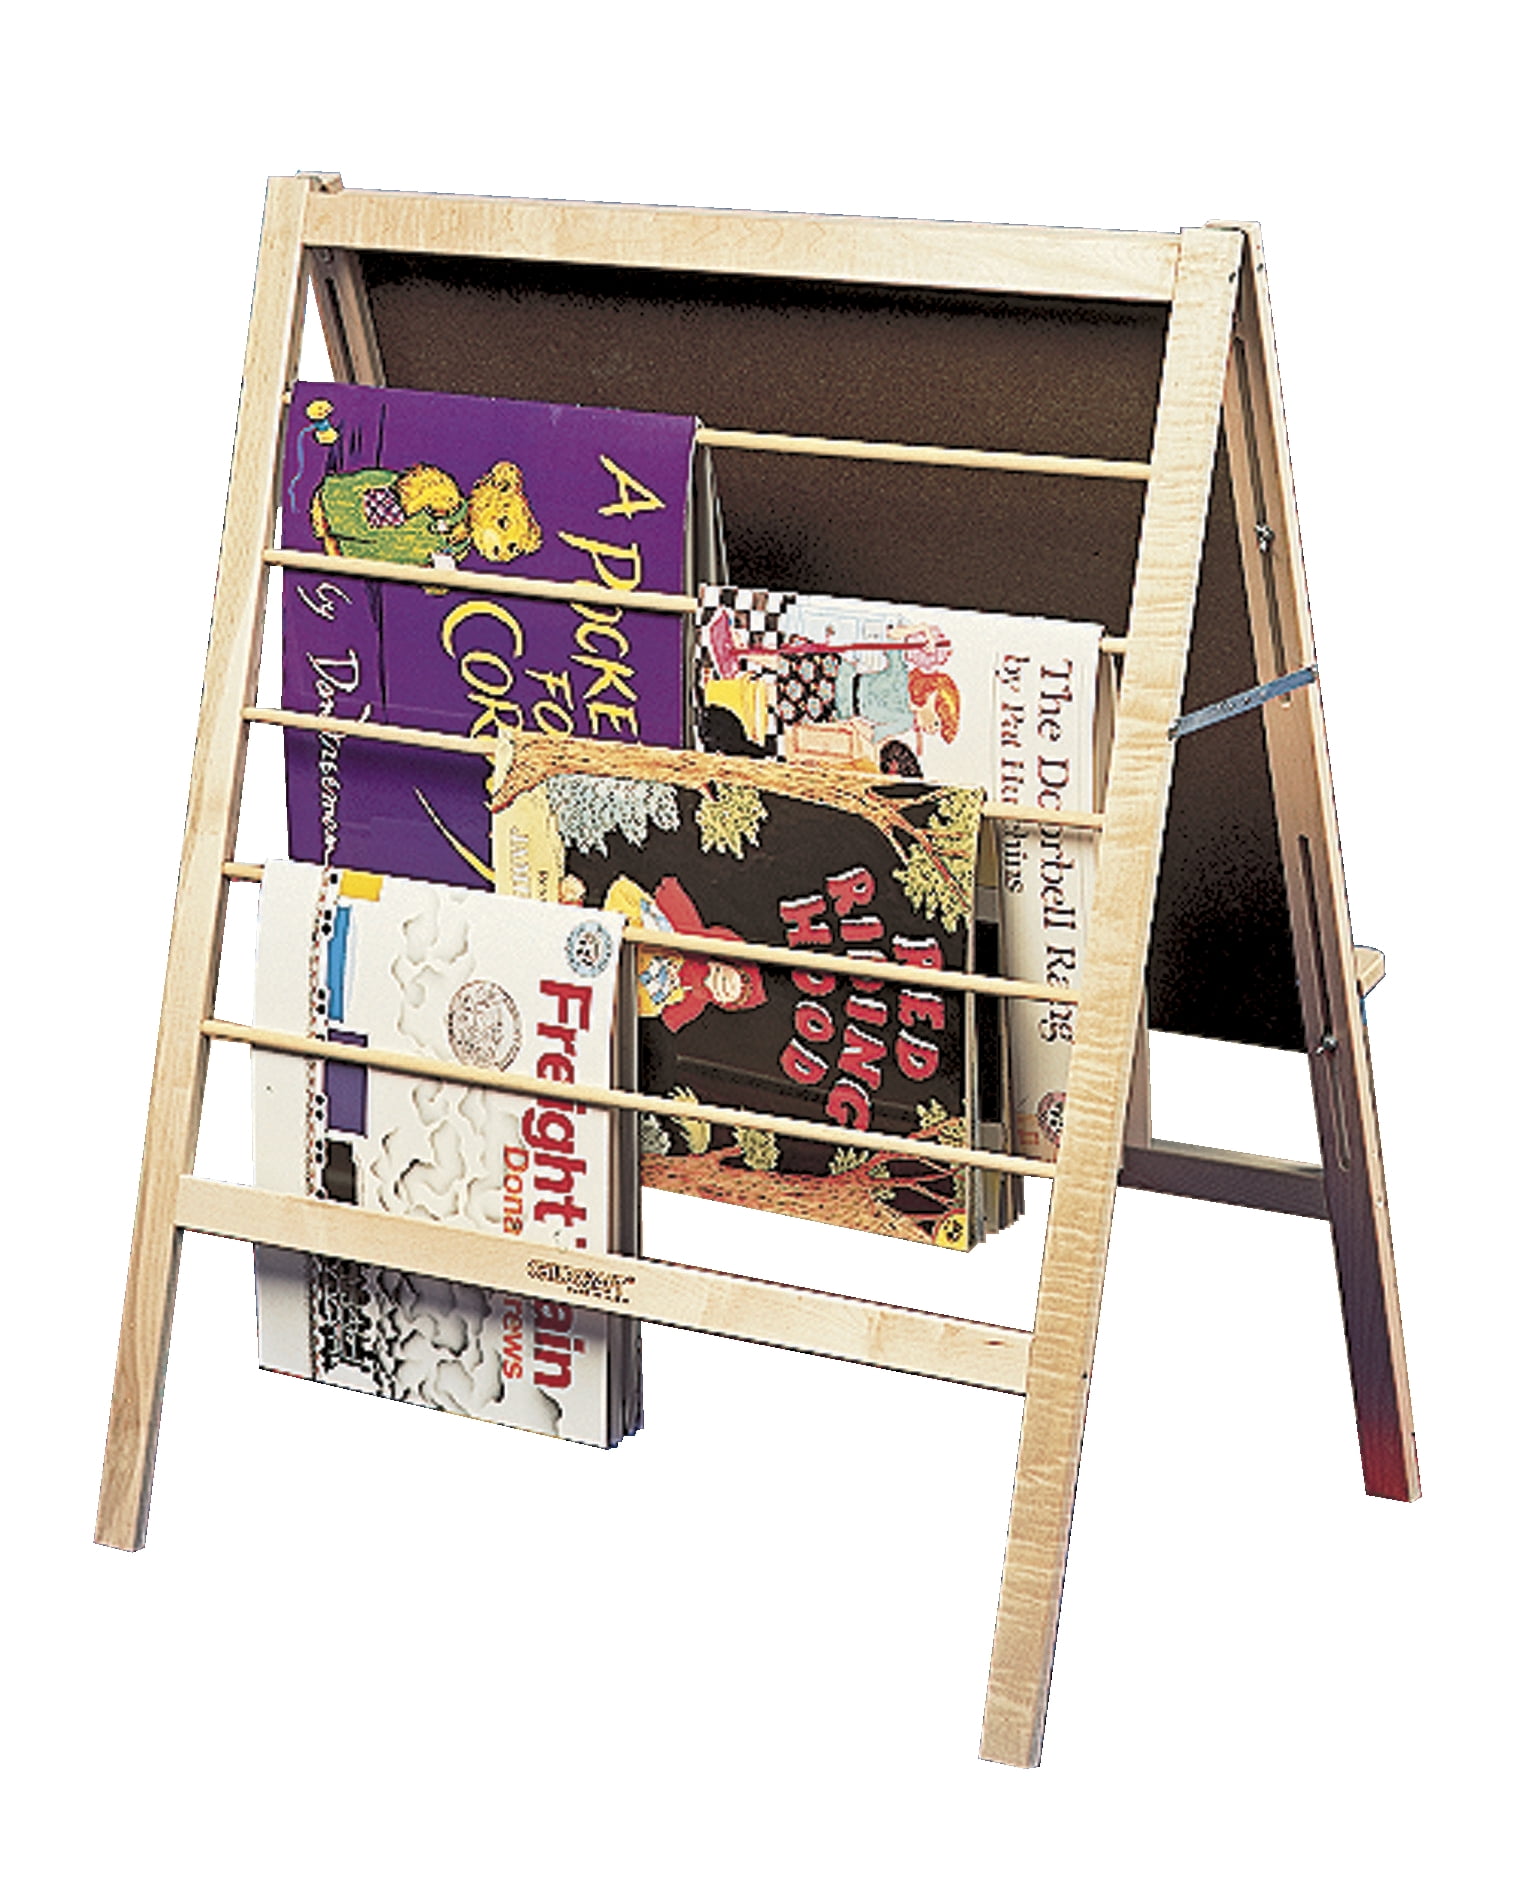 Childcraft Tabletop Easel, 21-5/8 x 23 x 22-5/8 Inches